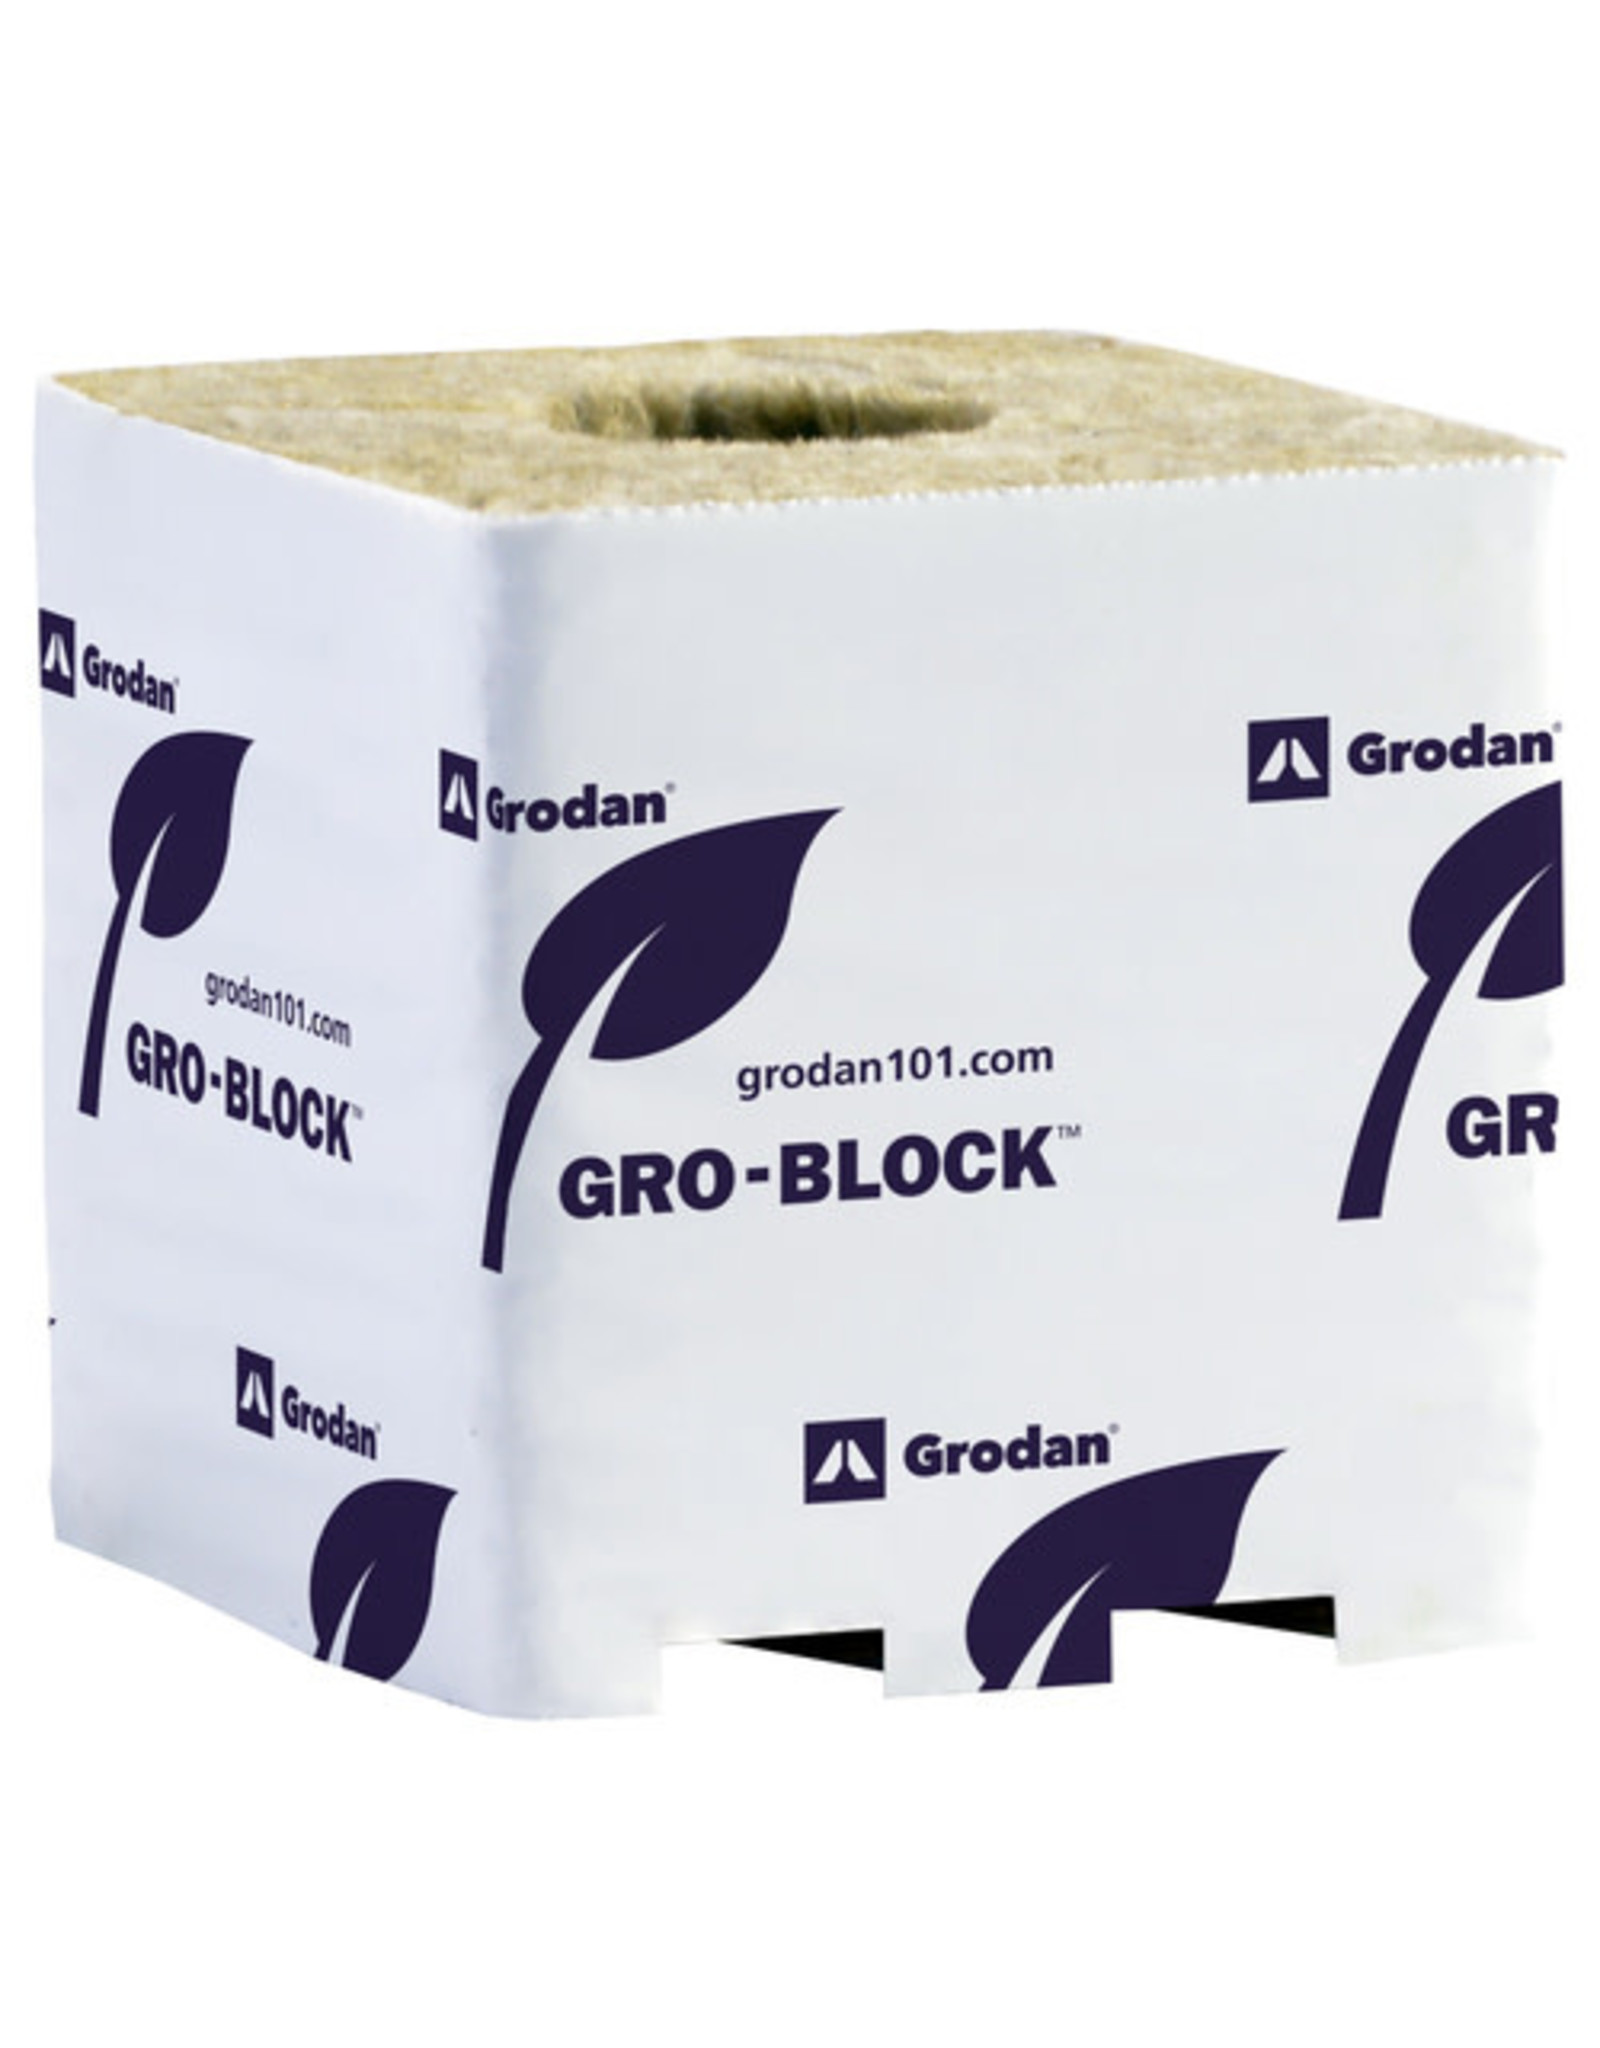 Grodan Gro Block Improved Large 4Inches GR10 w/ hole (4Inchesx4Inches4Inches) wrapped 6/strip